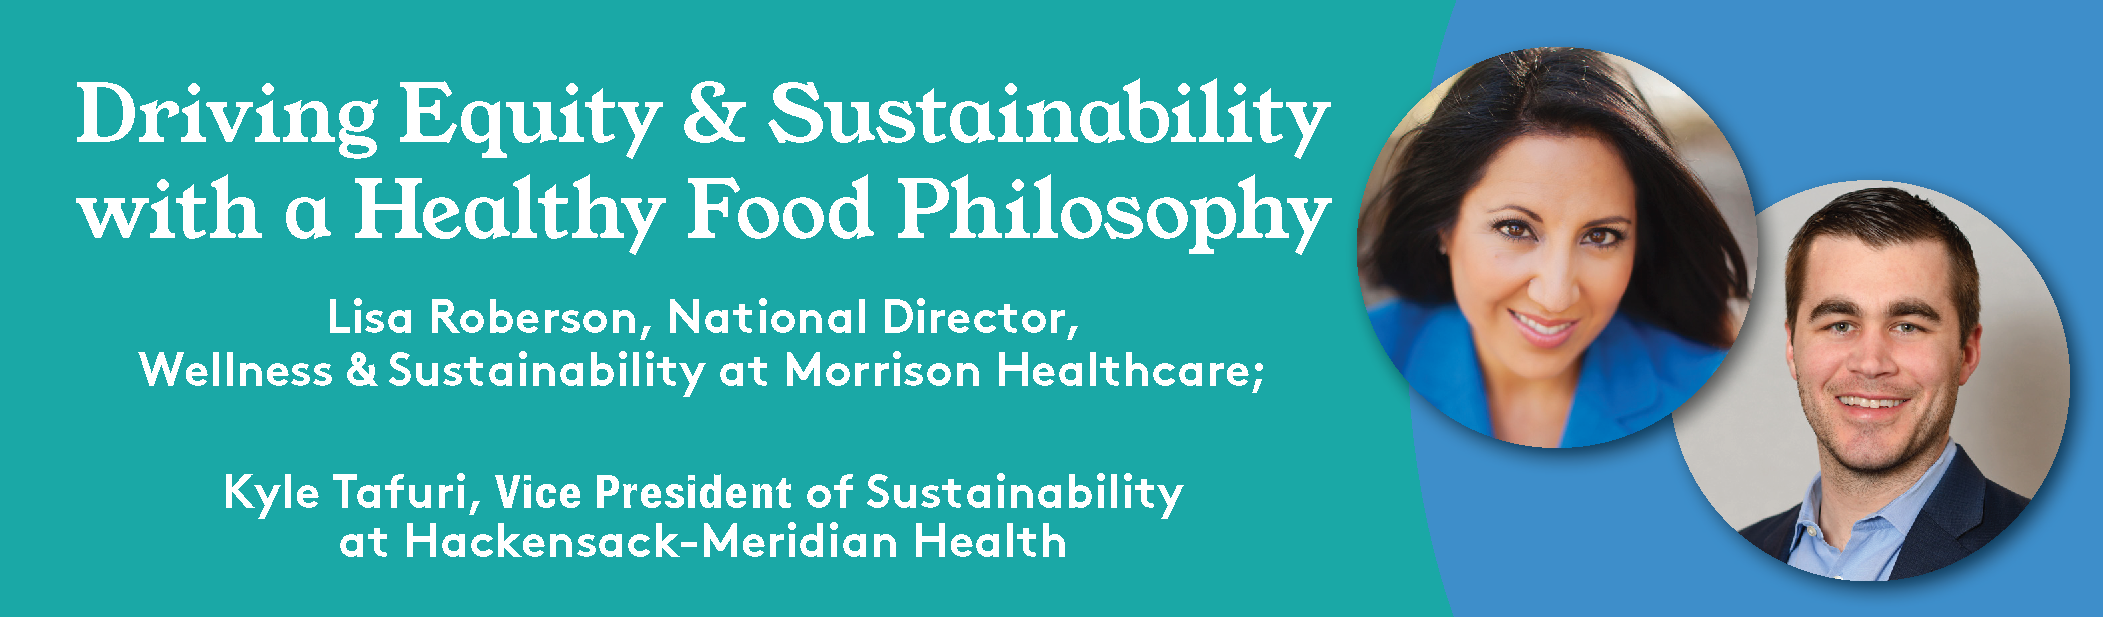 Driving Equity & Sustainability with a Healthy Food Philosophy